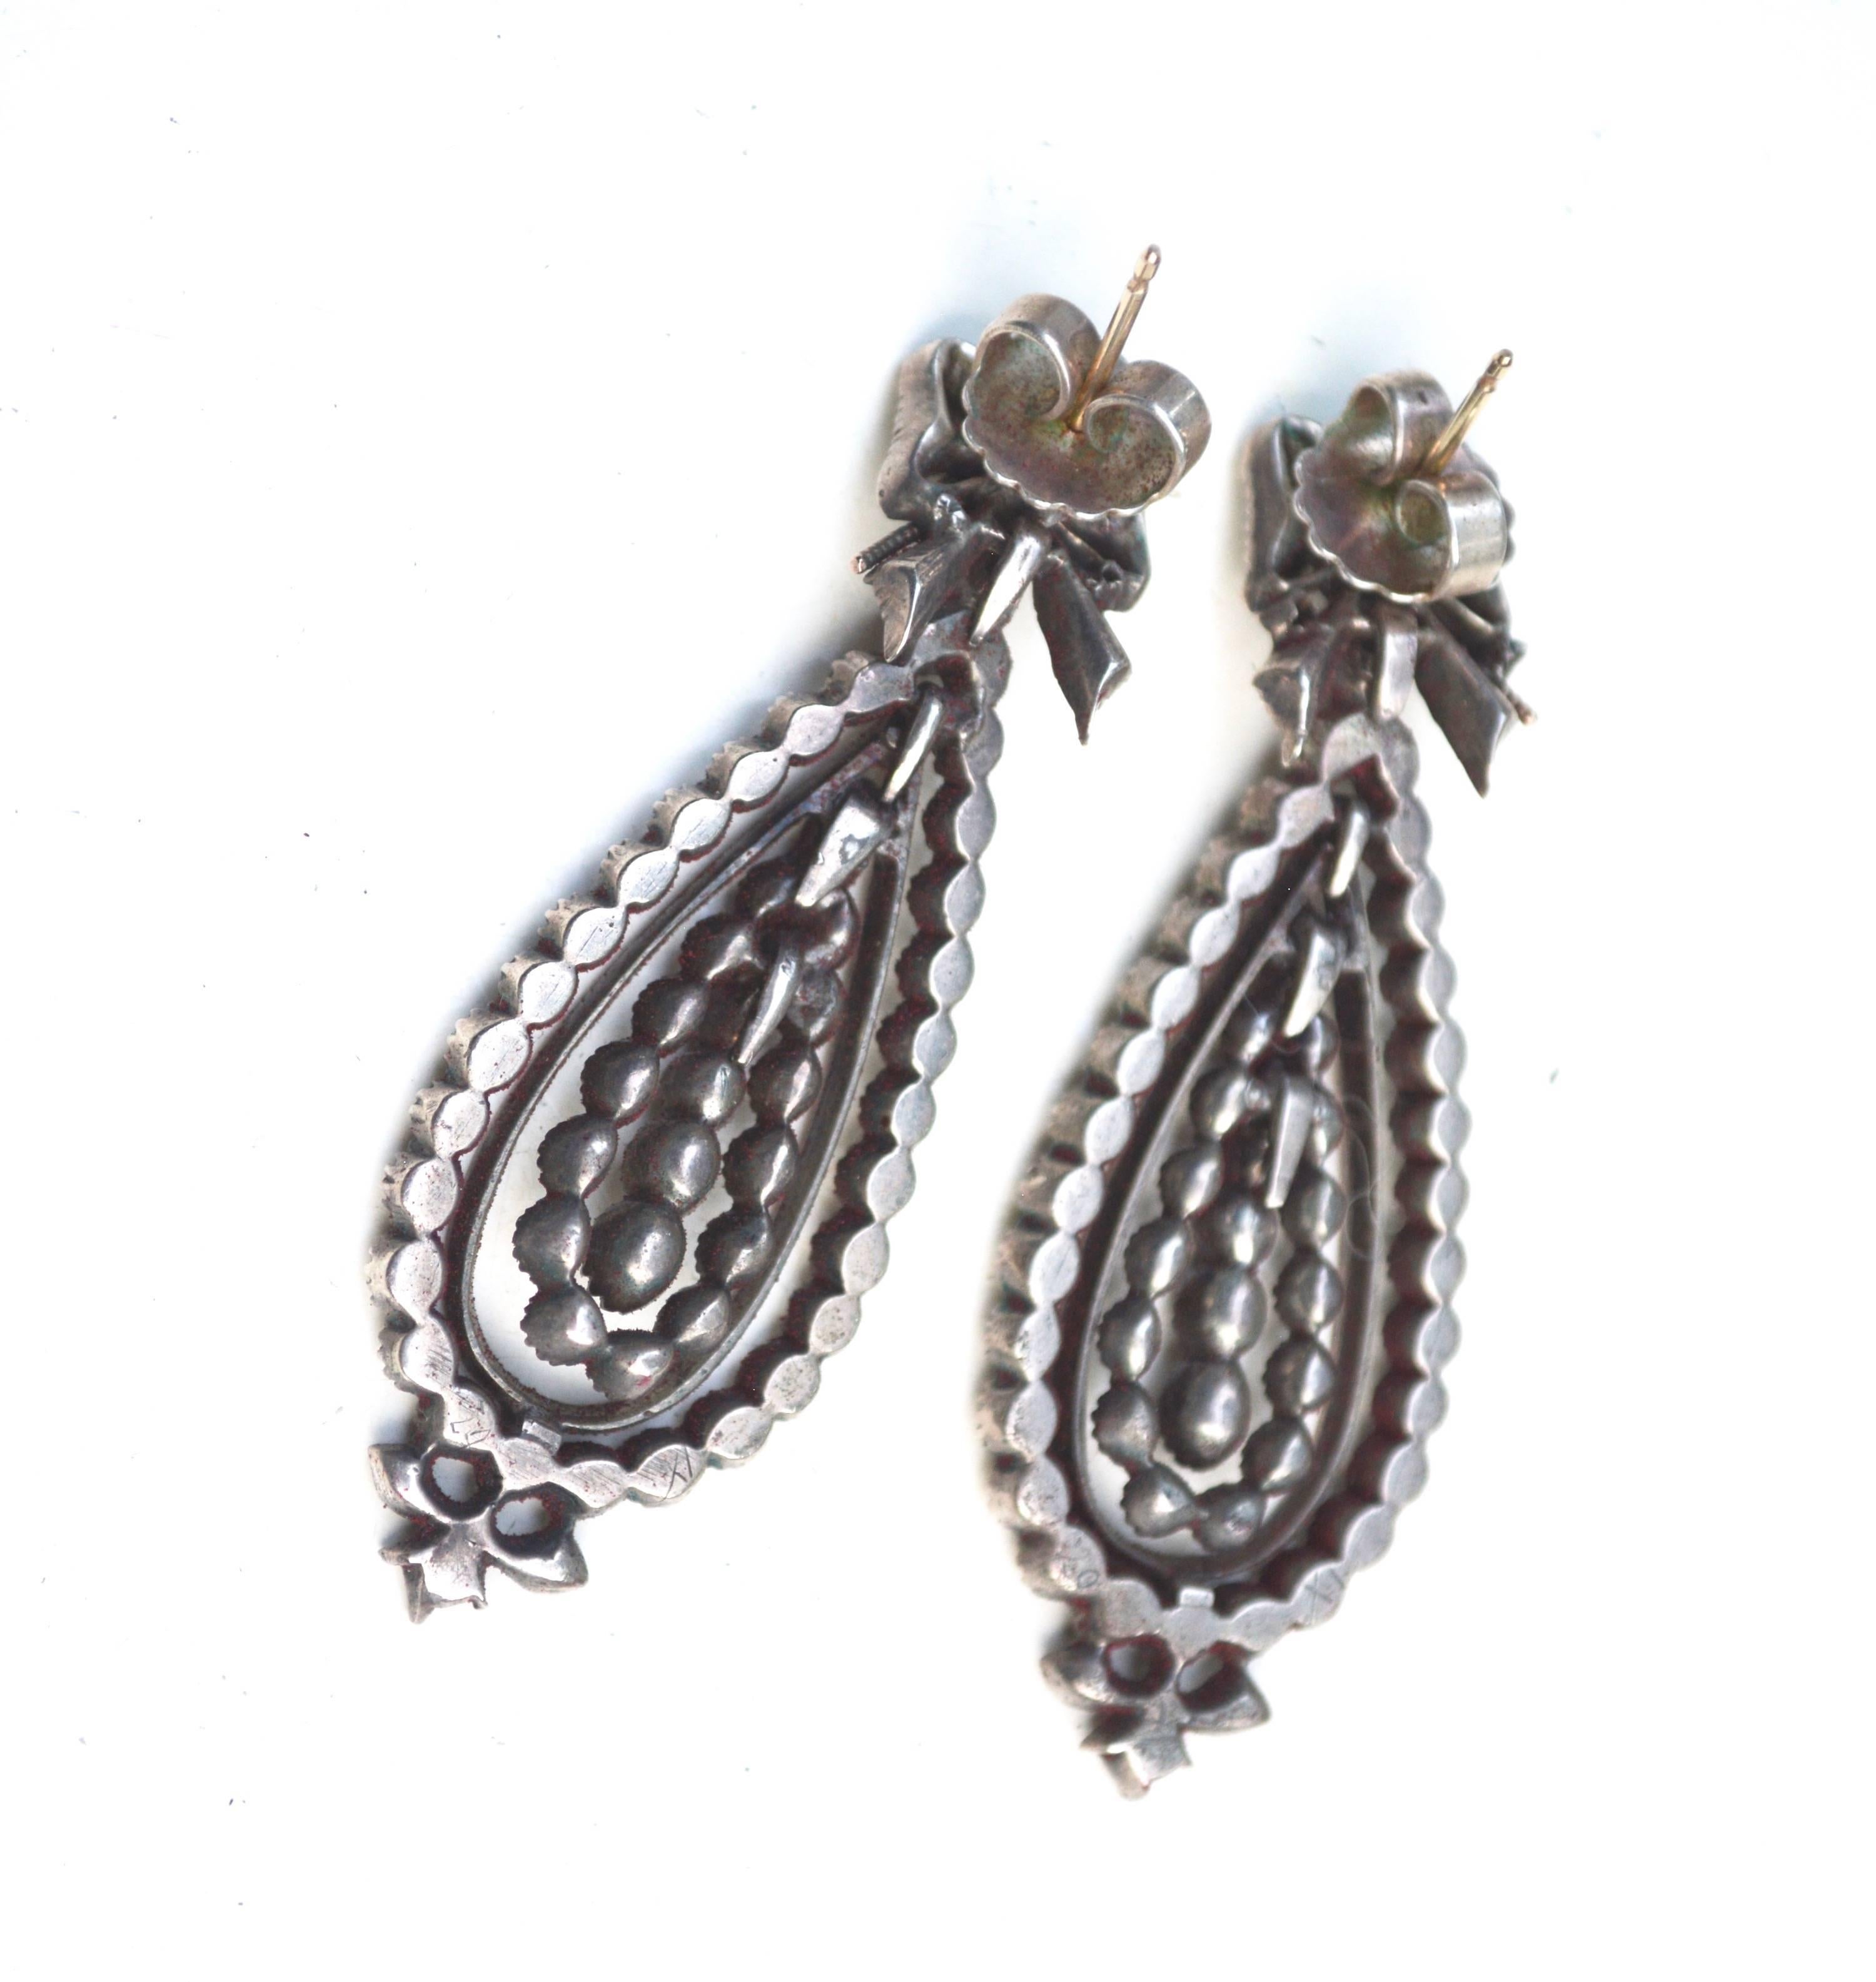 Beautiful handcrafted antique 1700s or 18th century silver and gold paste drop earrings.  Sterling and gold detailing.  About 2.25